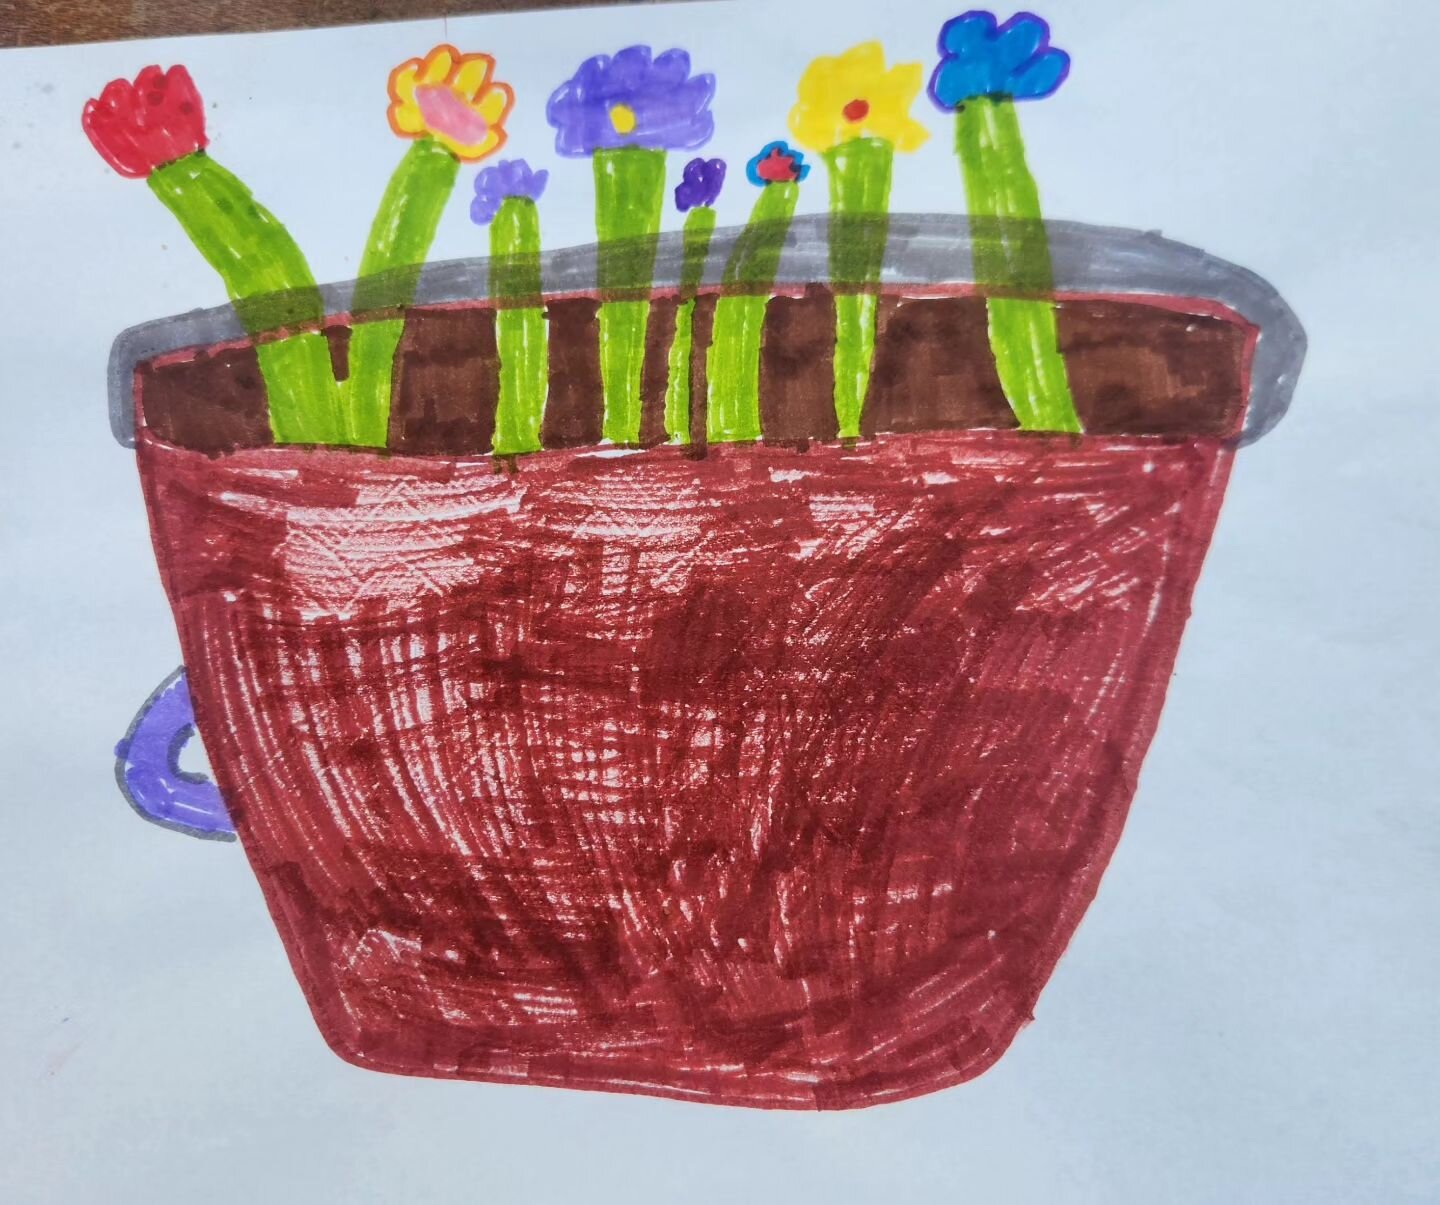 Thank you Drew for this super rad flower pot art, you're a rad little creative director. It was joy seeing so many beautiful faces today

Back at it Sunday 10 til 1. Come twirl and celebrate this sunshine with me

Your support is always appreciated, 